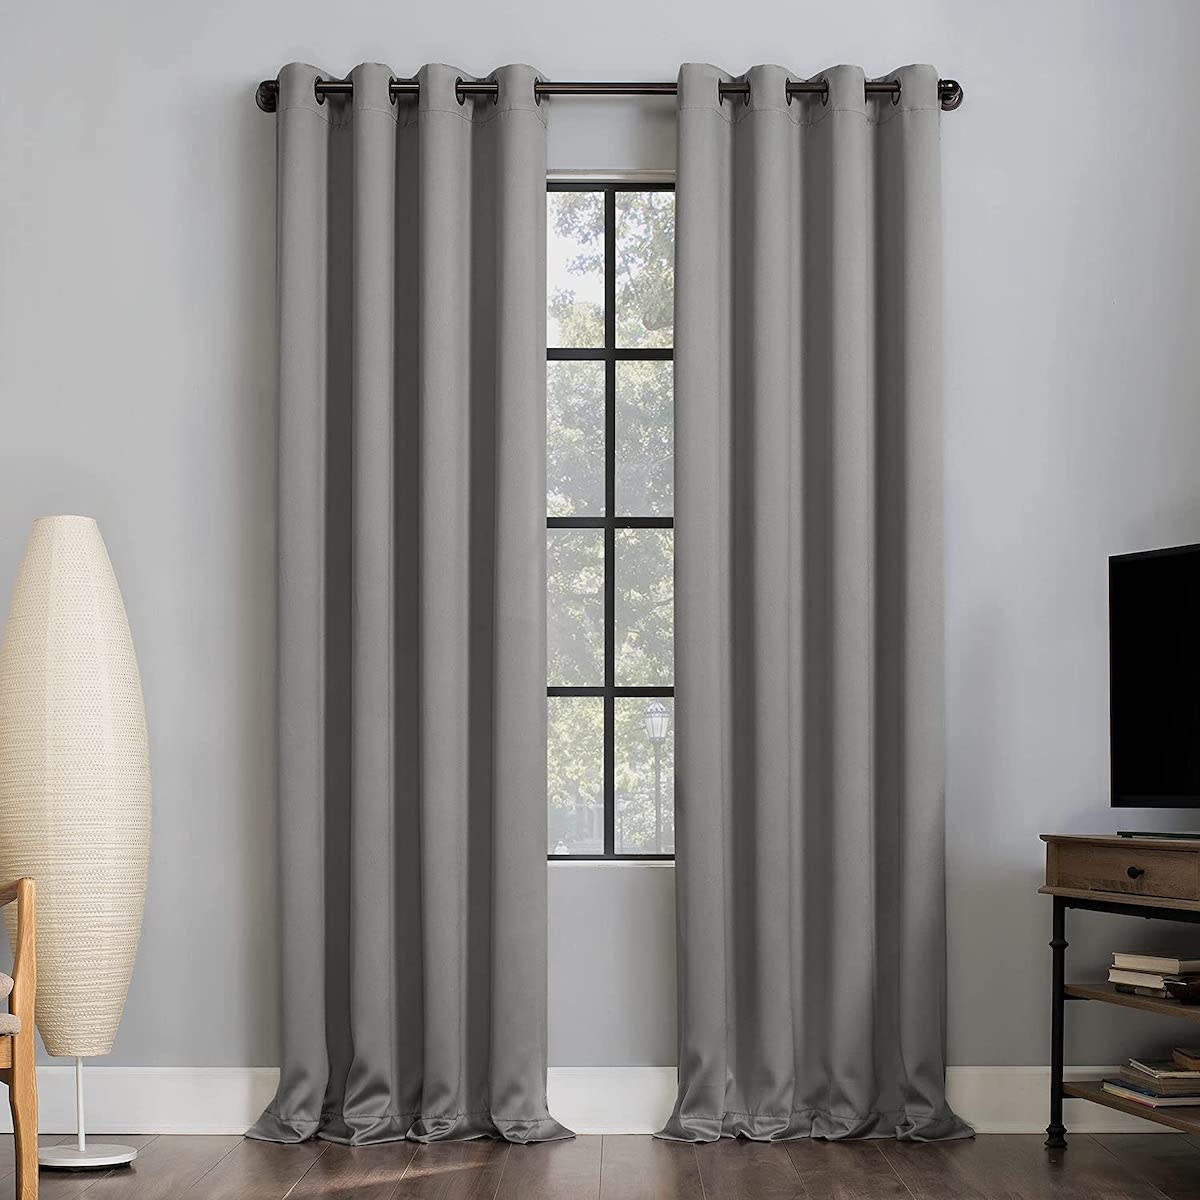 https://cdn.apartmenttherapy.info/image/upload/v1653660213/at/product%20listing/Sun_Zero_Theater_Grade_Blackout_Curtains.jpg